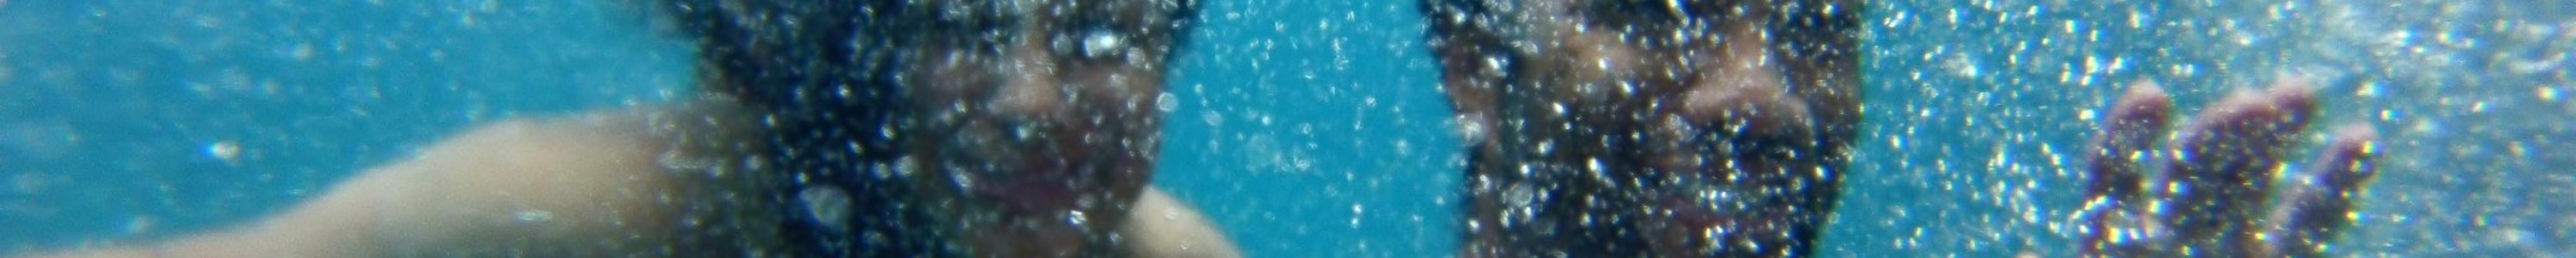 An underwater photo of two people smiling and waving happily with bubbles everywhere